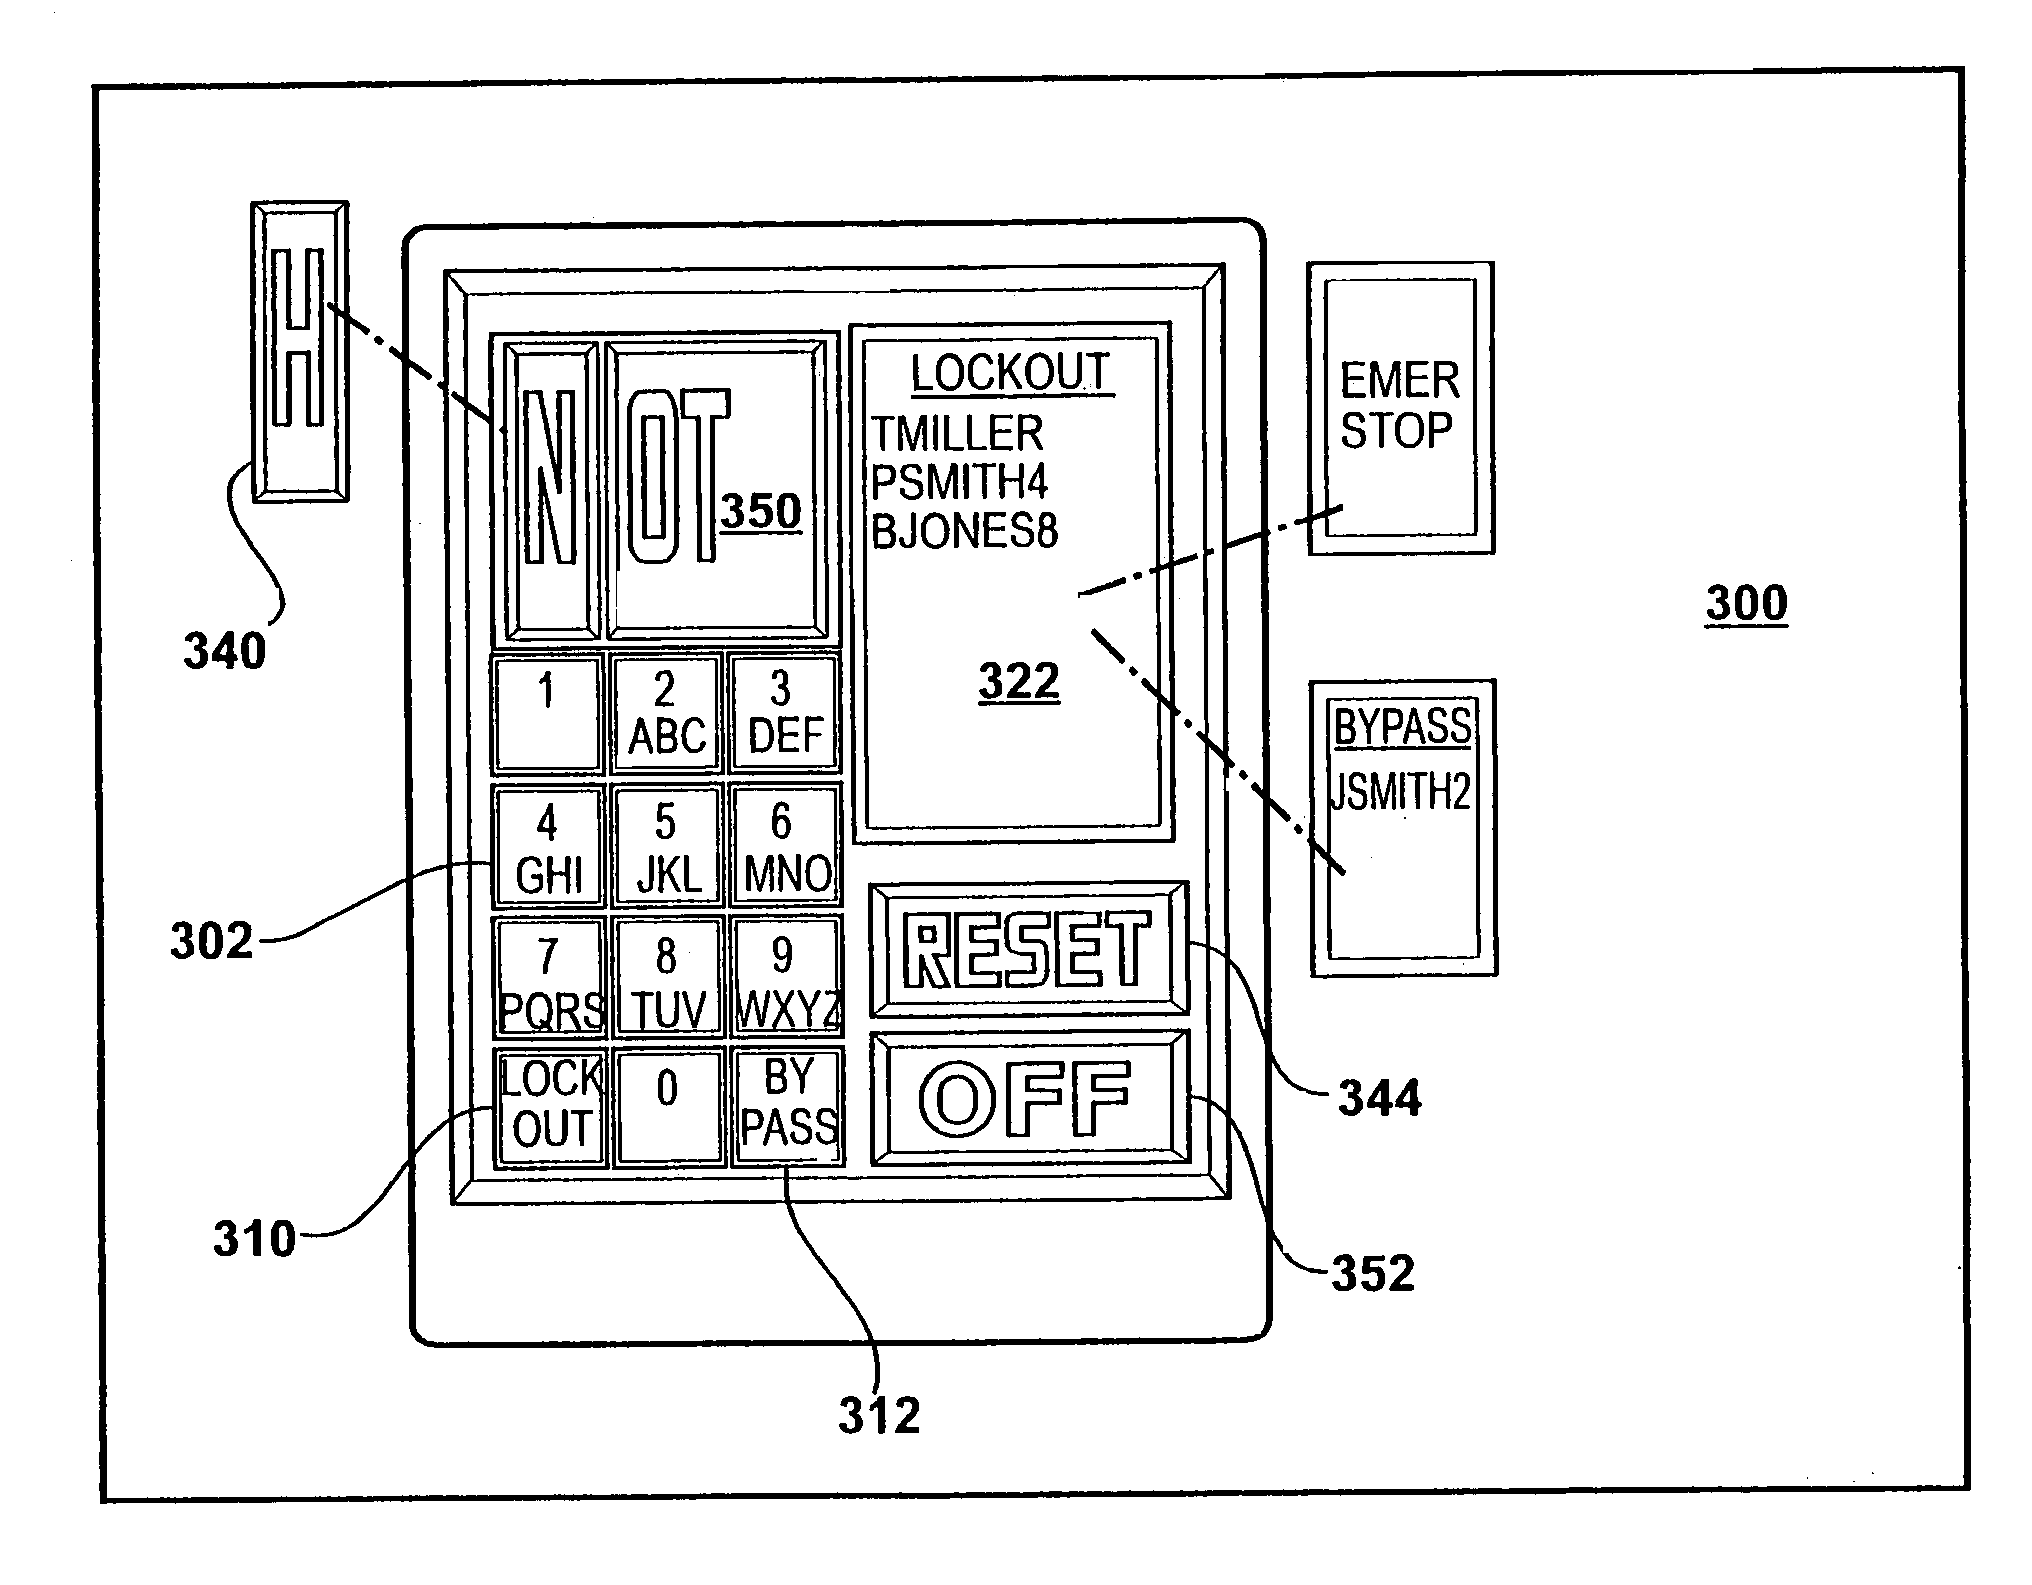 Electrical panel access and control apparatus including true emergency stop and power buss lockout